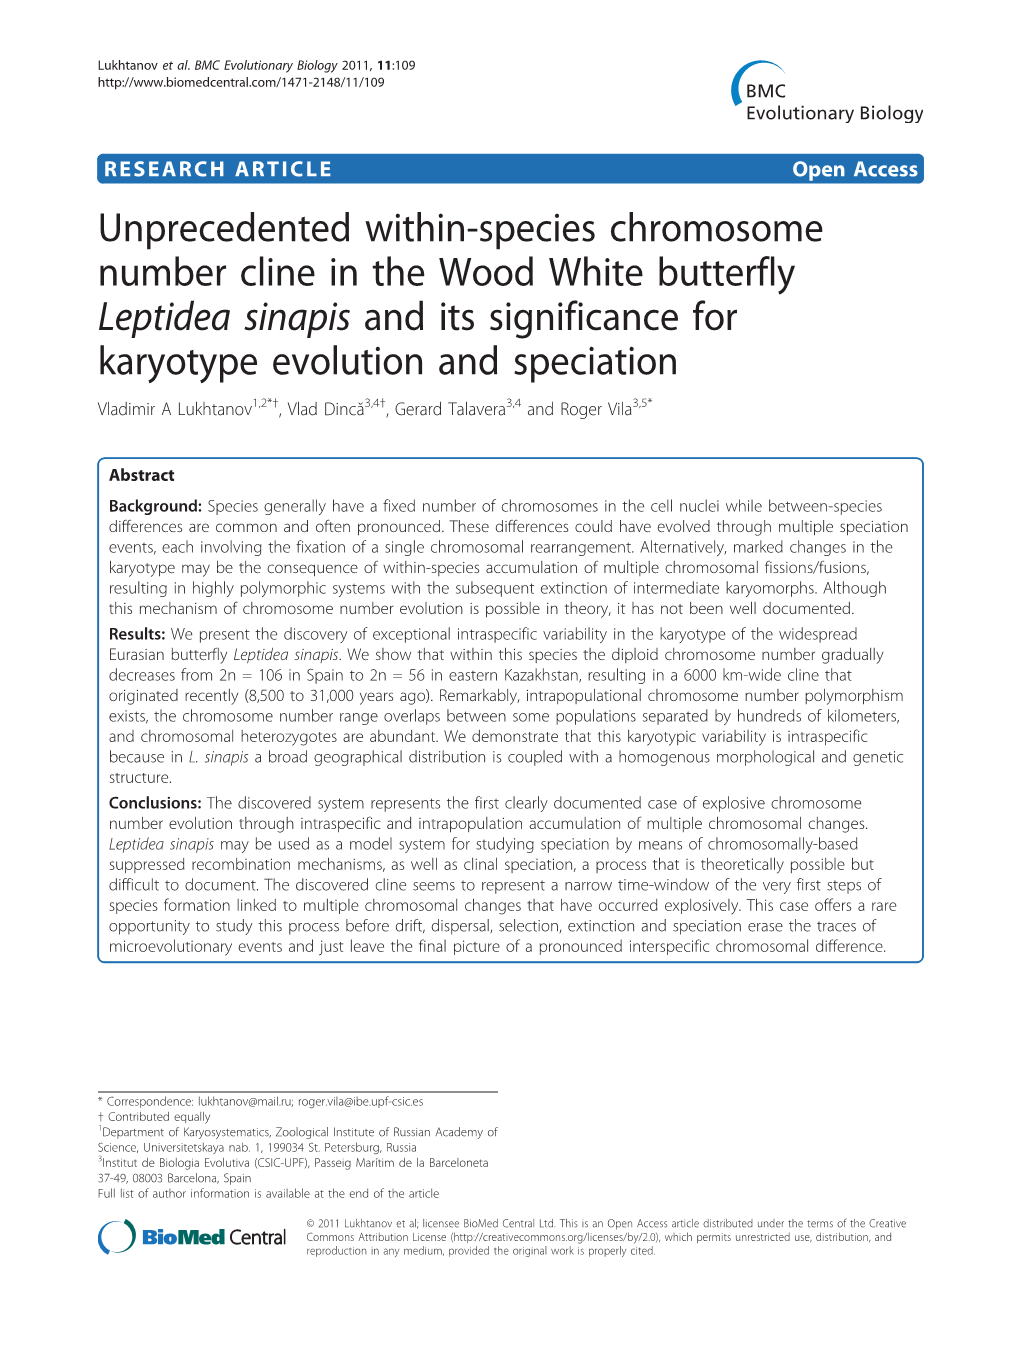 Unprecedented Within-Species Chromosome Number Cline in The